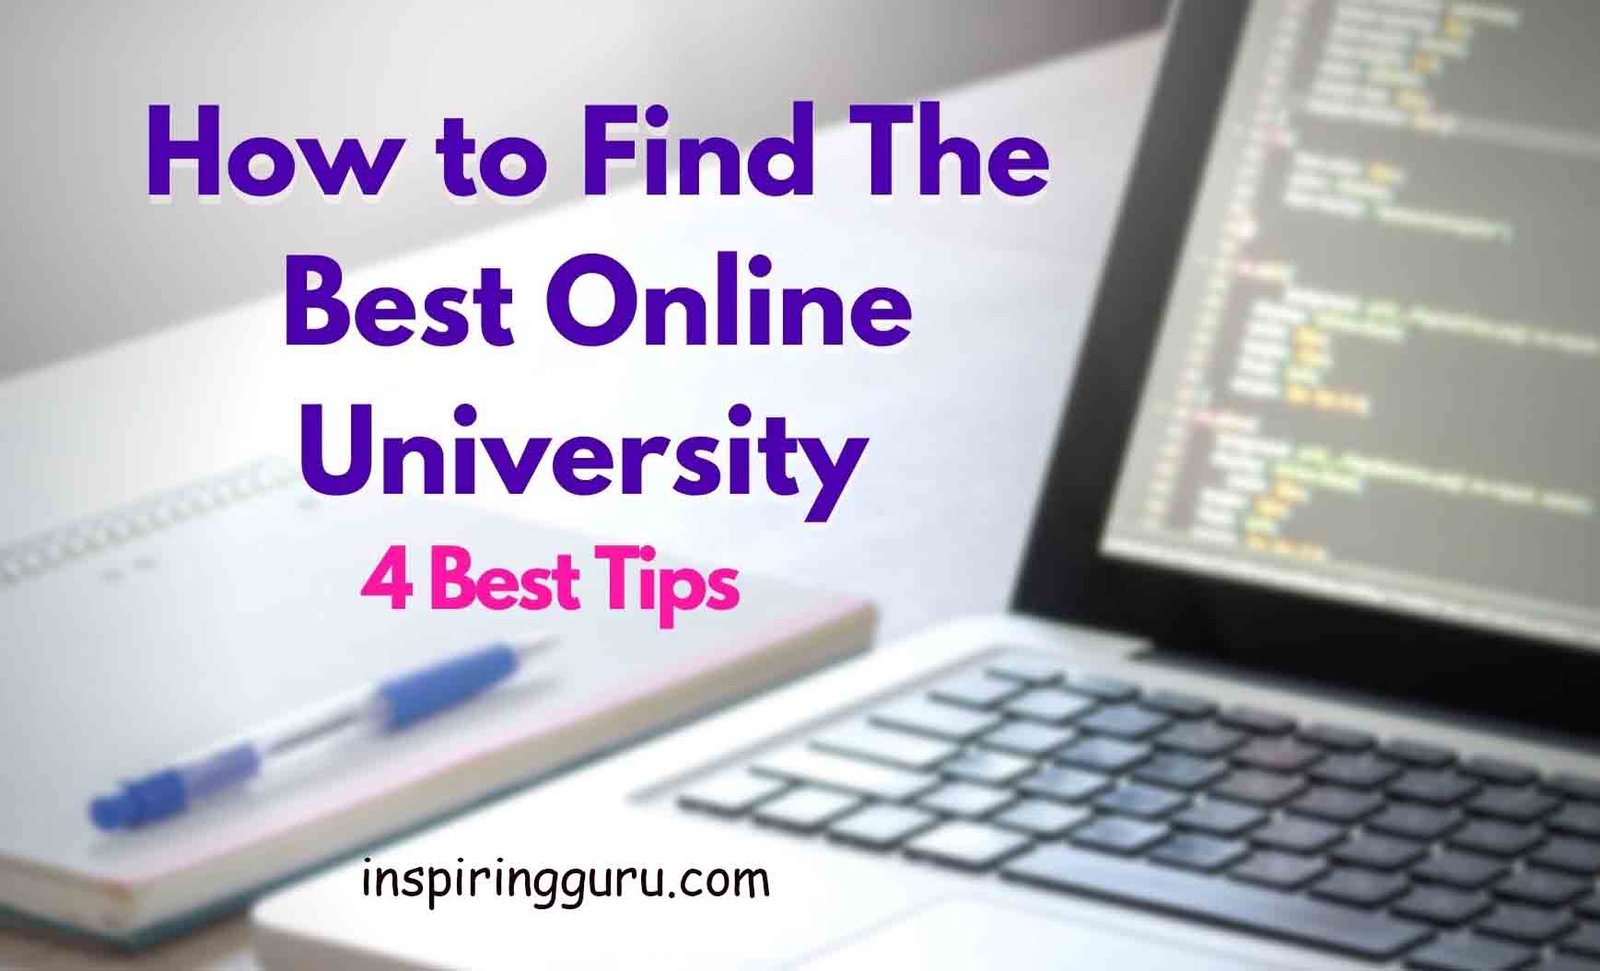 How to Find The Best Online University